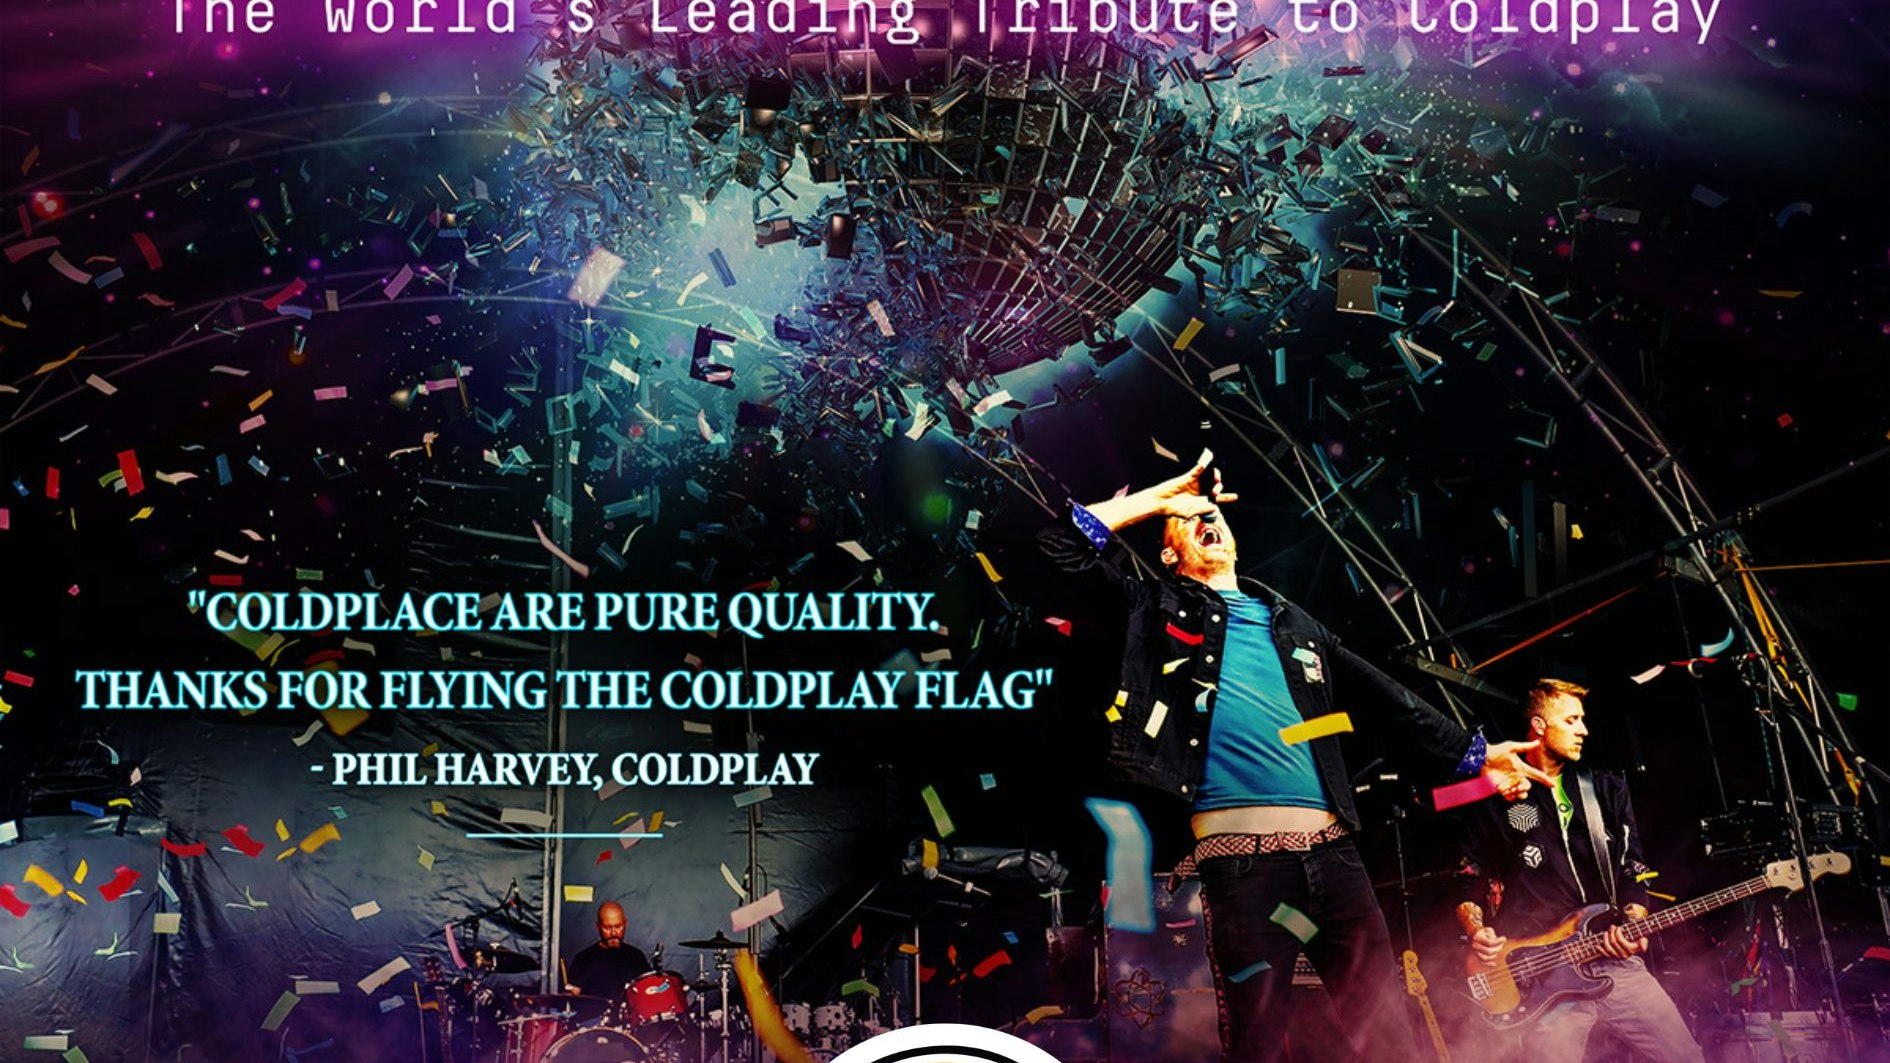 Coldplace – The World’s Leading Tribute to Coldplay